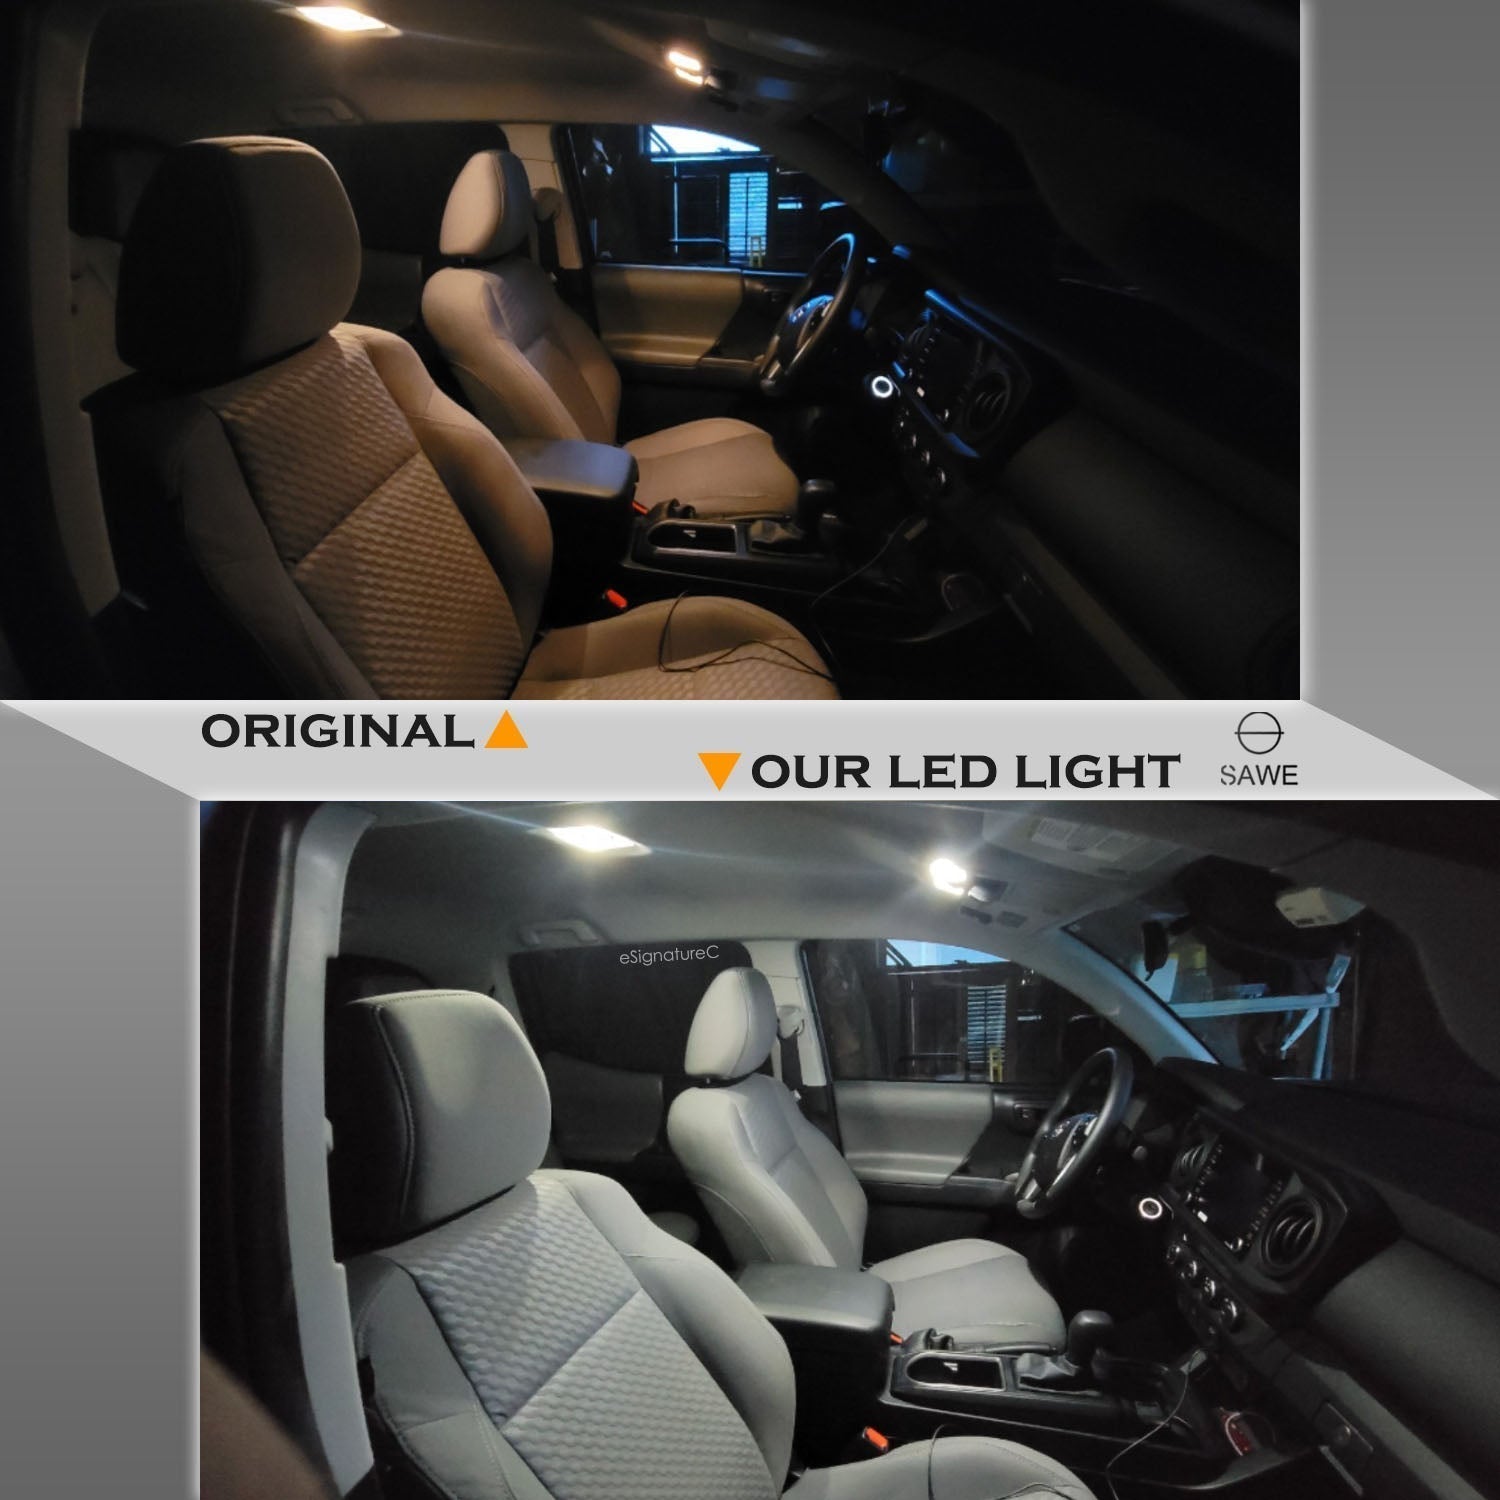 For Lexus IS300 Interior LED Lights - Dome & Map Light Bulbs Package Kit for 2001 - 2005 - White